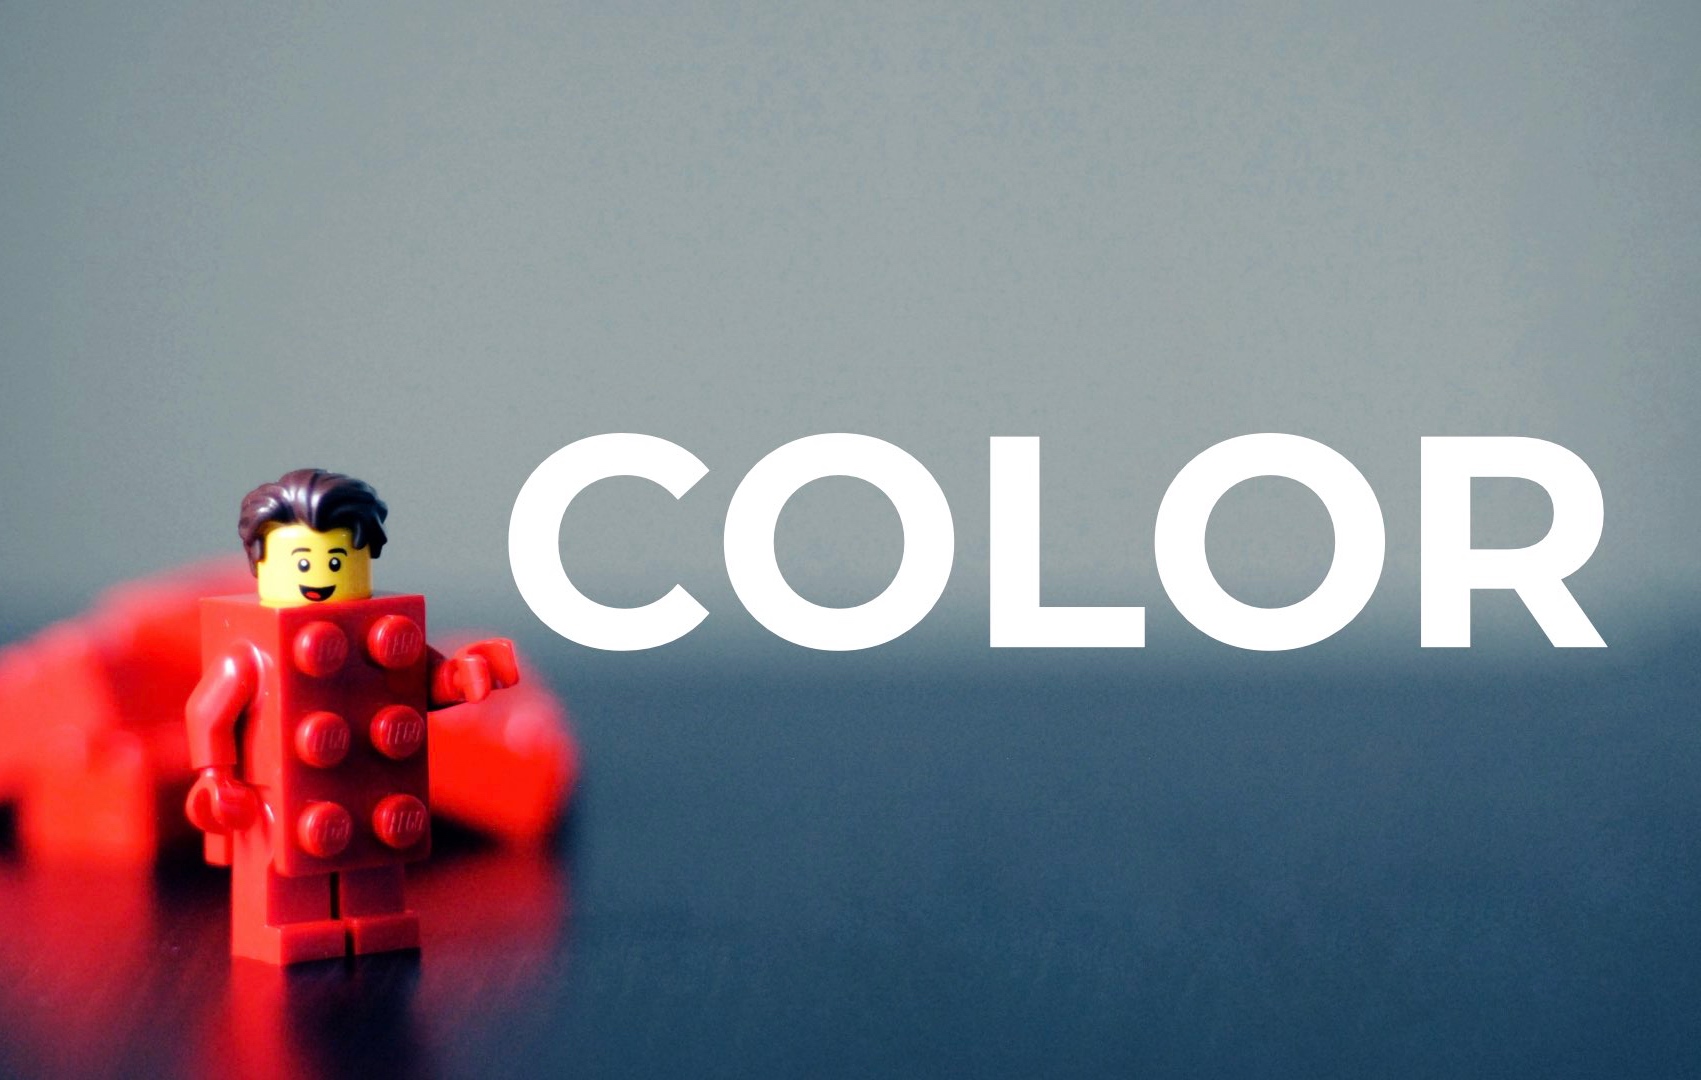 A friendly bright red LEGO man saying "Color!"